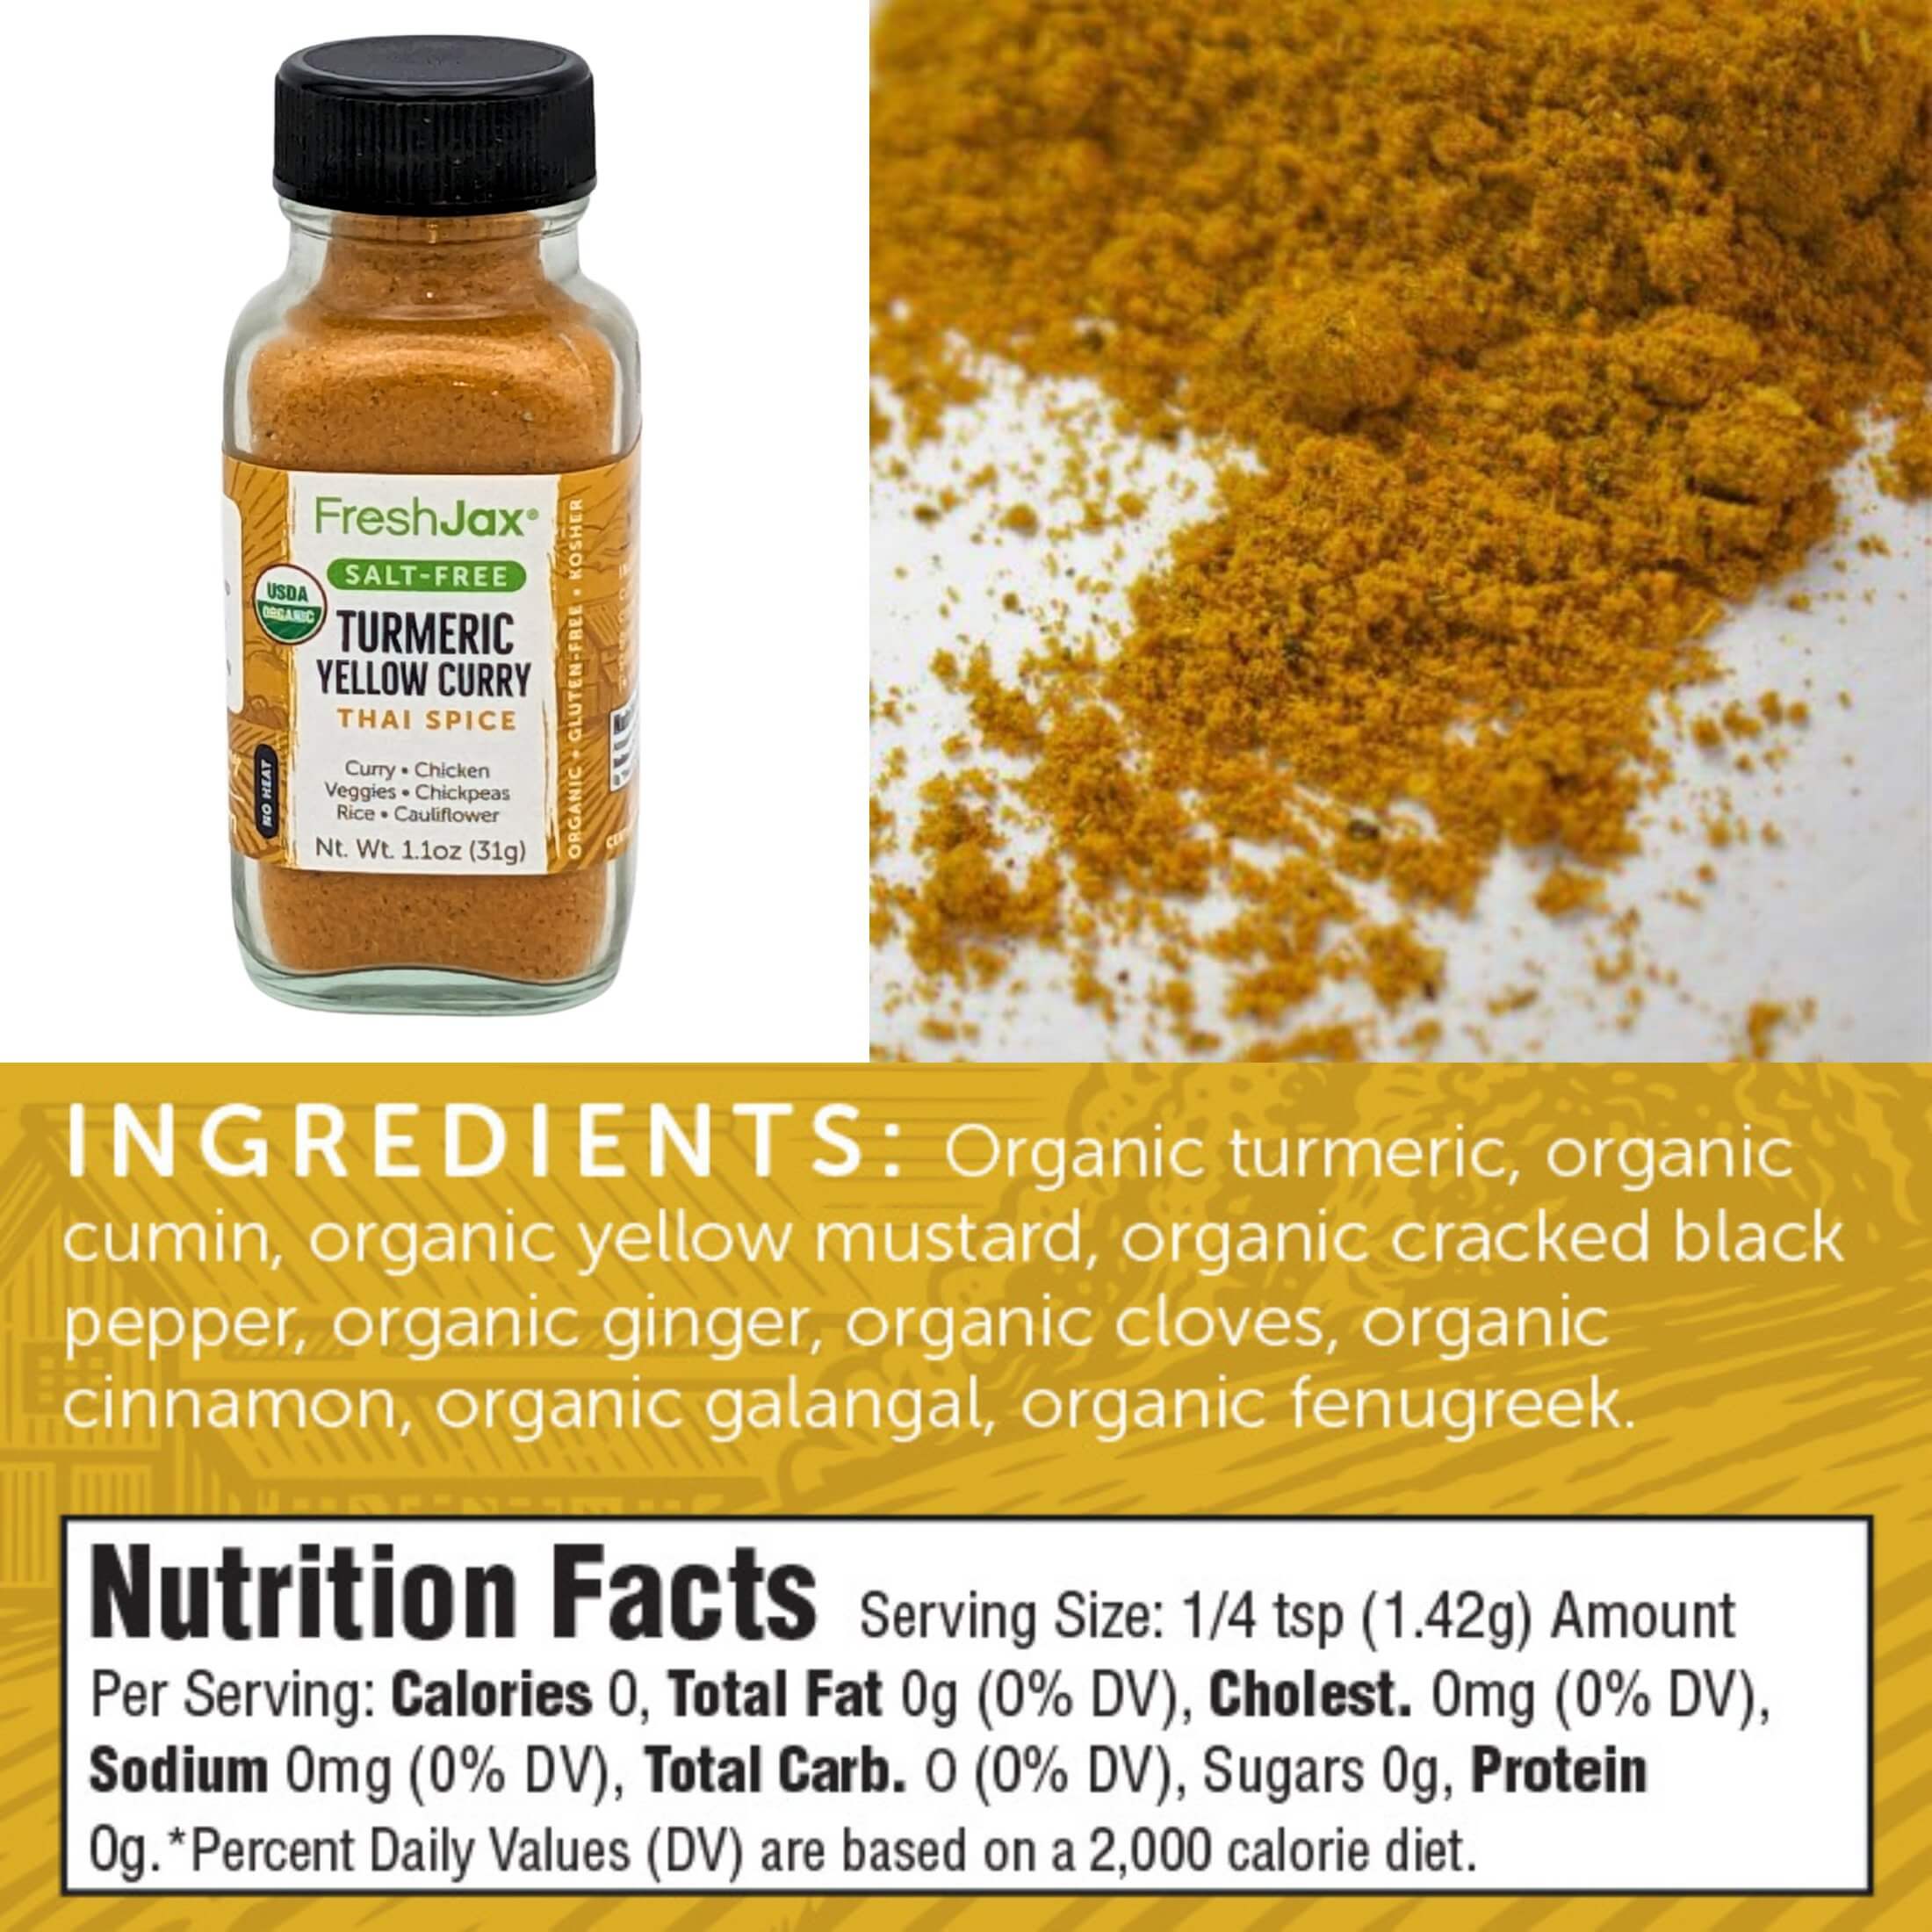 Salt-Free Turmeric Yellow Curry Ingredients and Nutritional Information